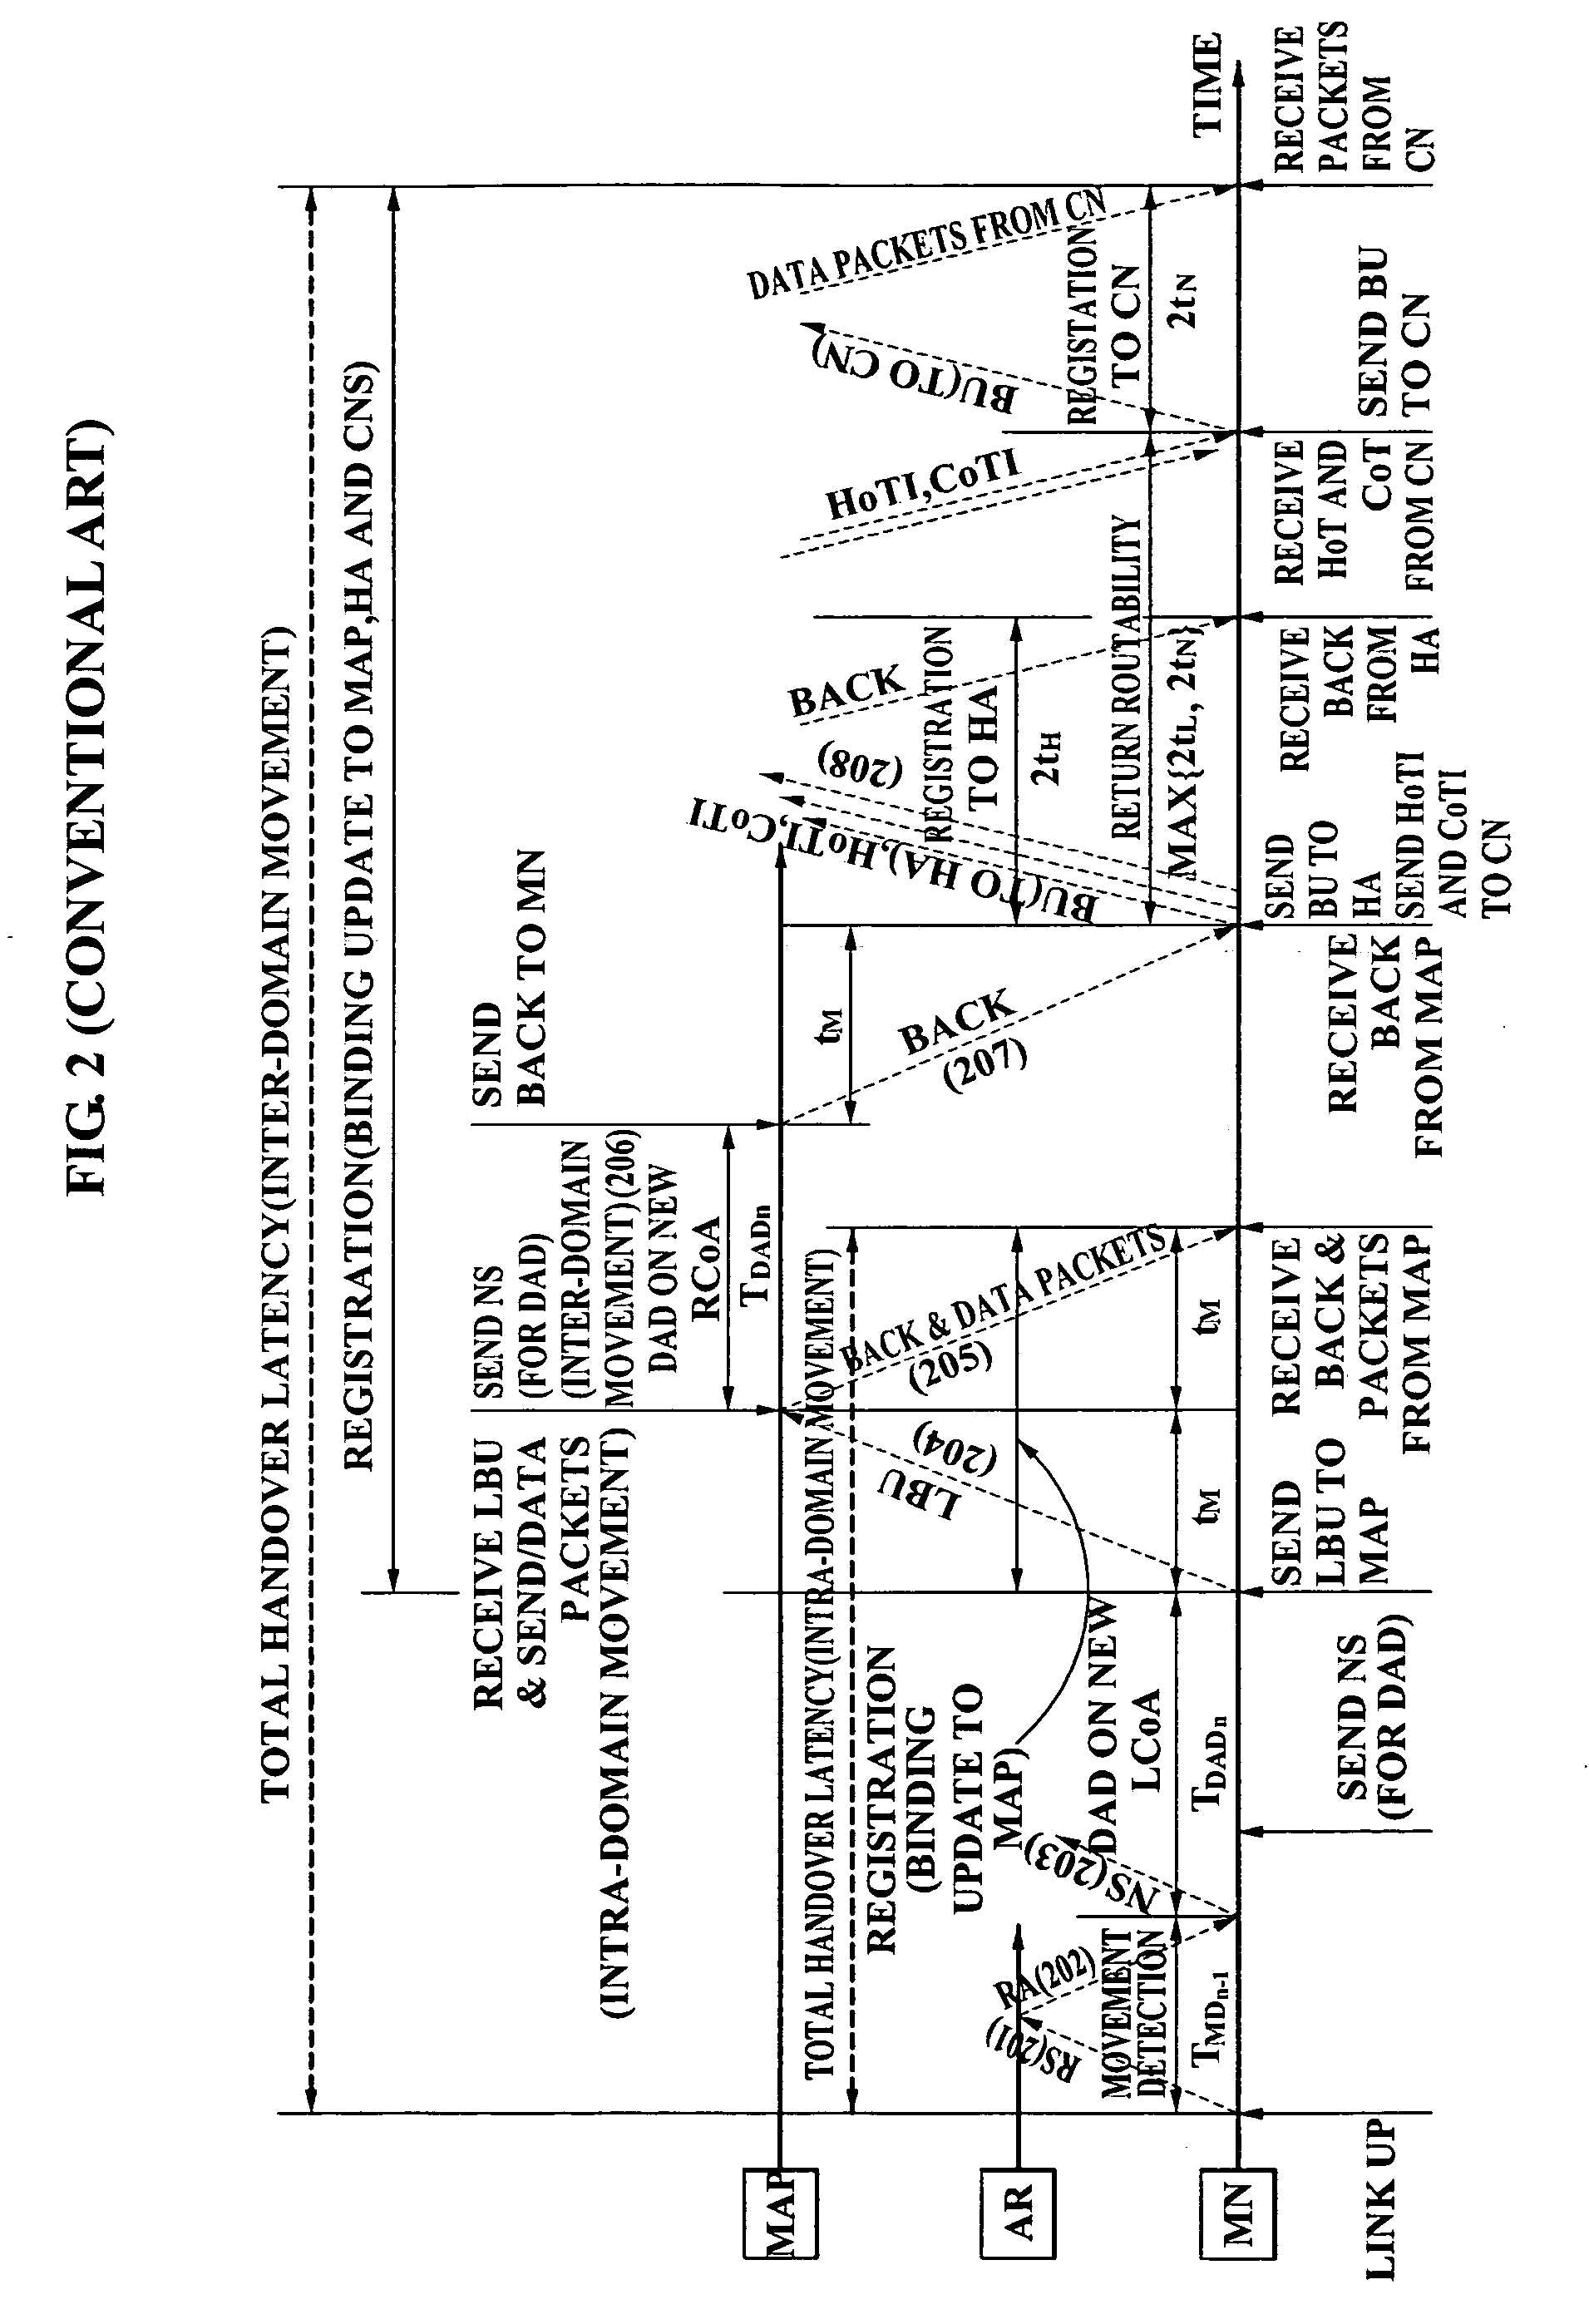 Apparatus for fast reactive handover in IPV6-based mobile system